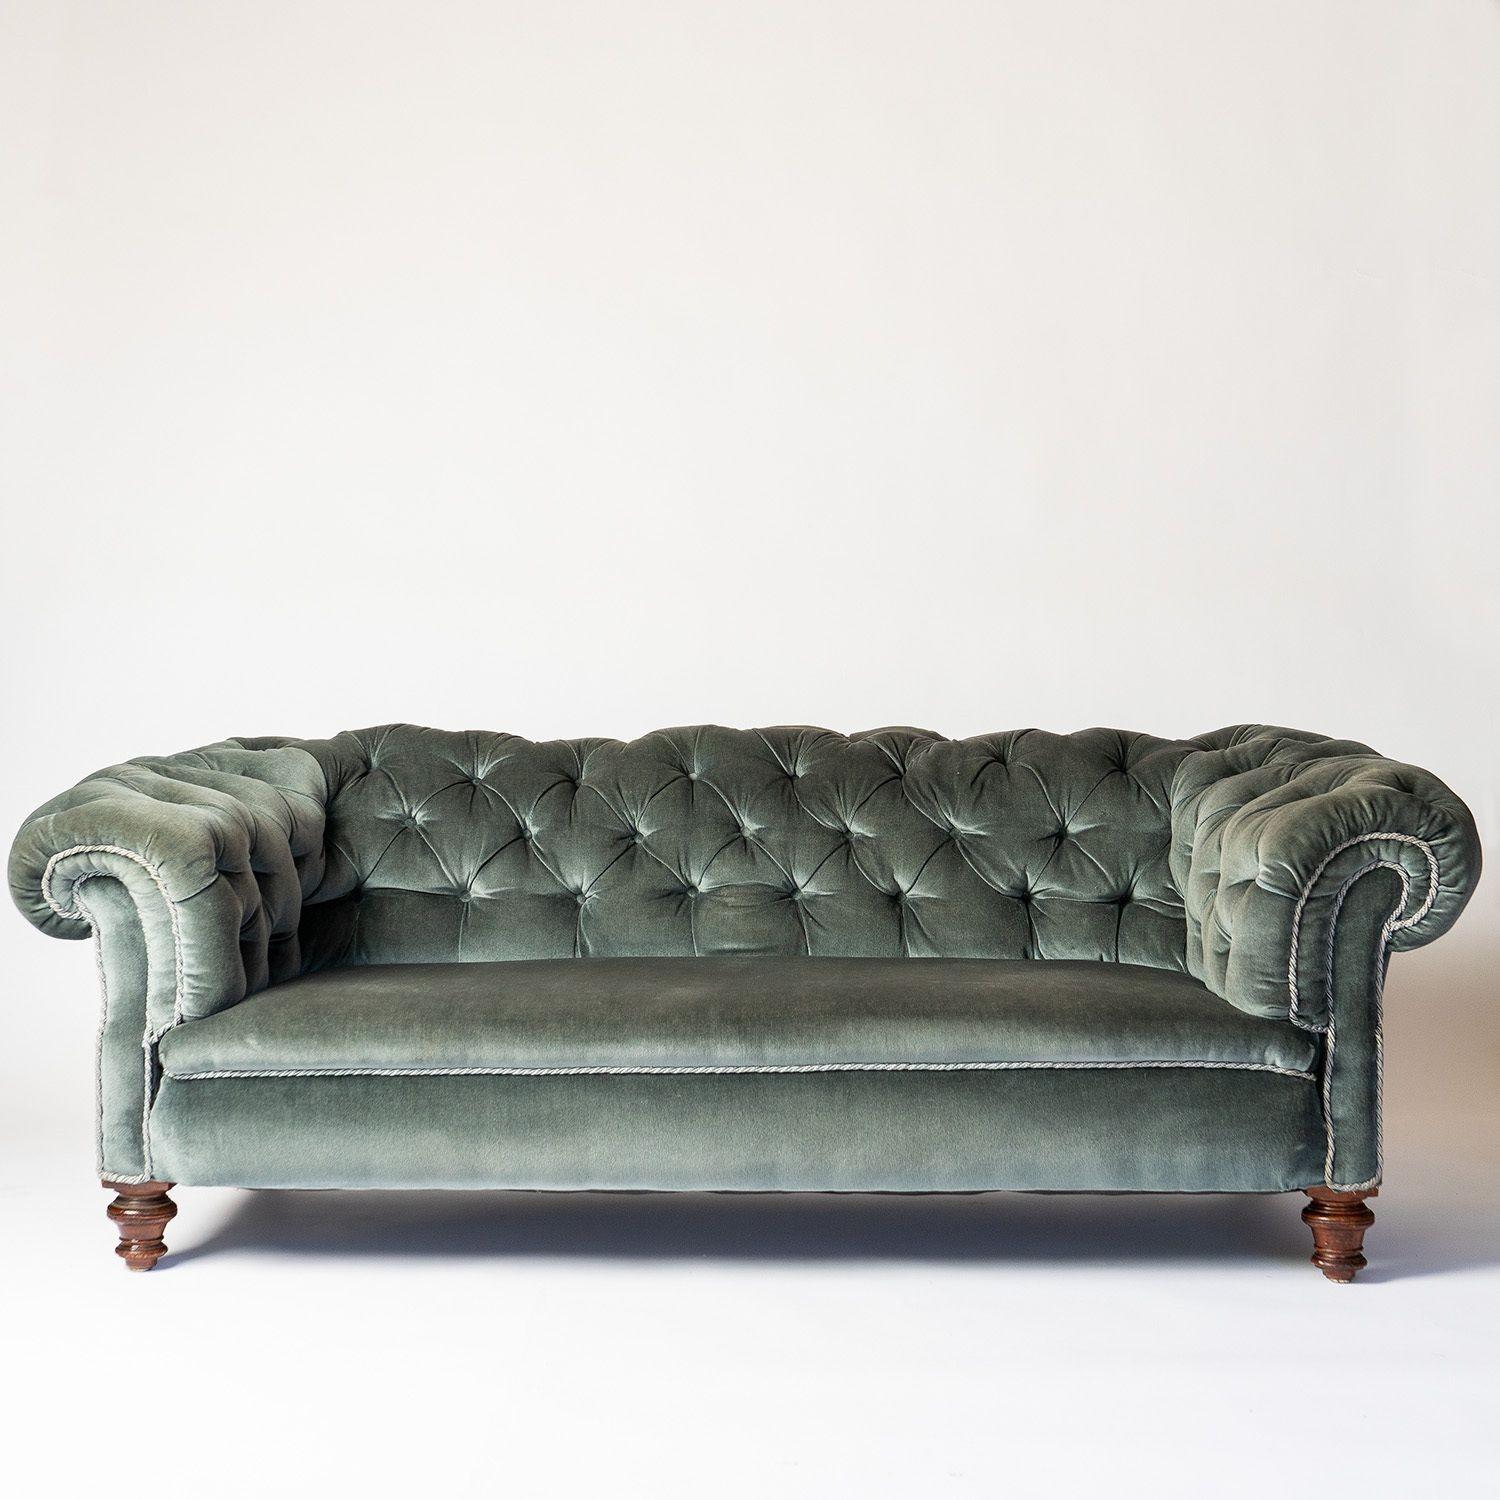 Antique two-seater settee, late 19th century
Sumptuous, deep, button-backed blue velvet upholstery.
 
Raised on turned mahogany legs.
 
It is in very good vintage condition, the upholstery is free from holes, tears or large stains, there are a